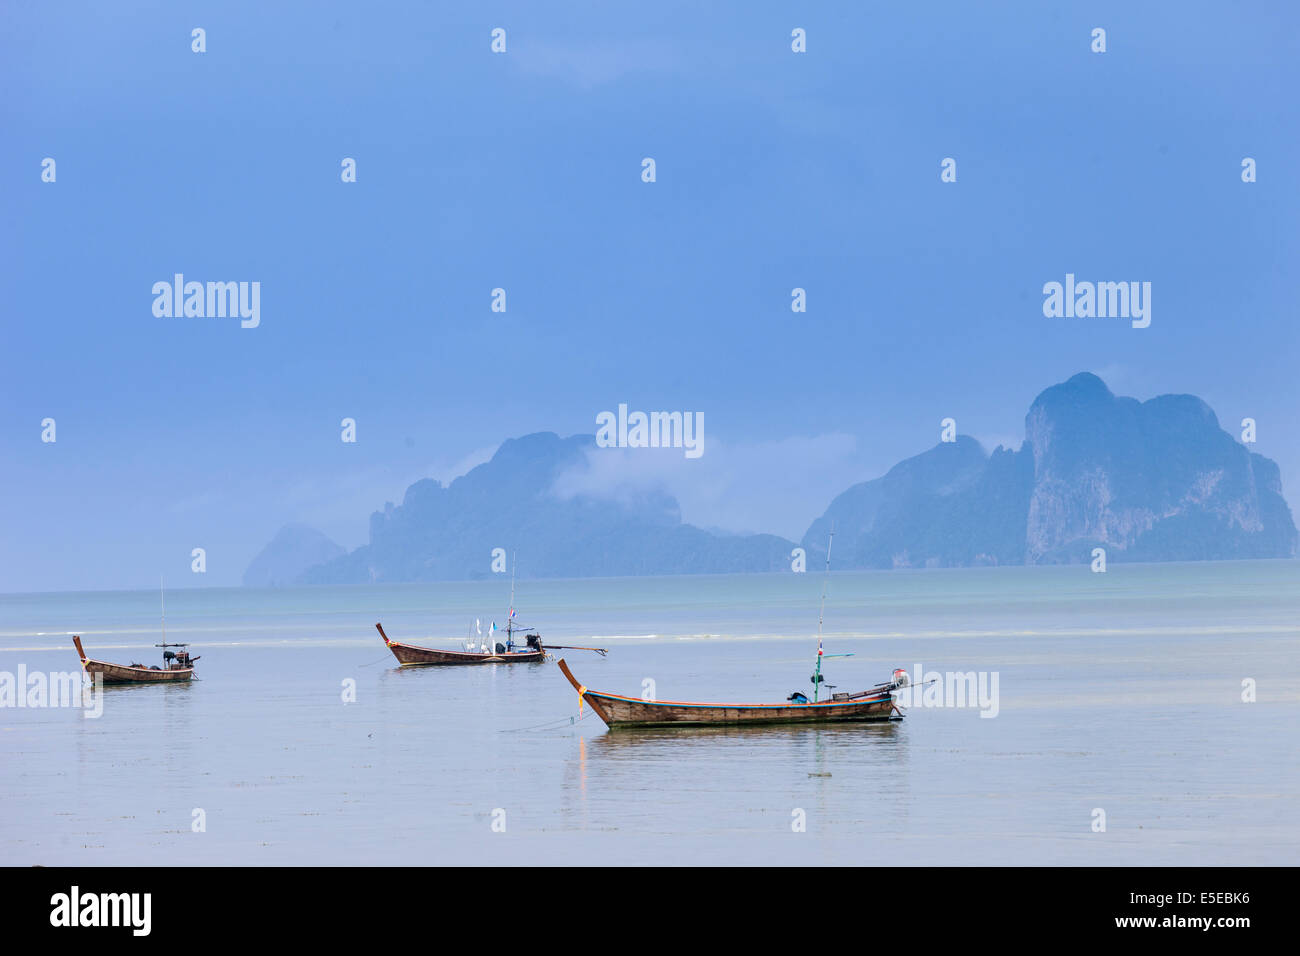 Long tail boats moored in Trang under heavy storm clouds, Thailand Stock Photo